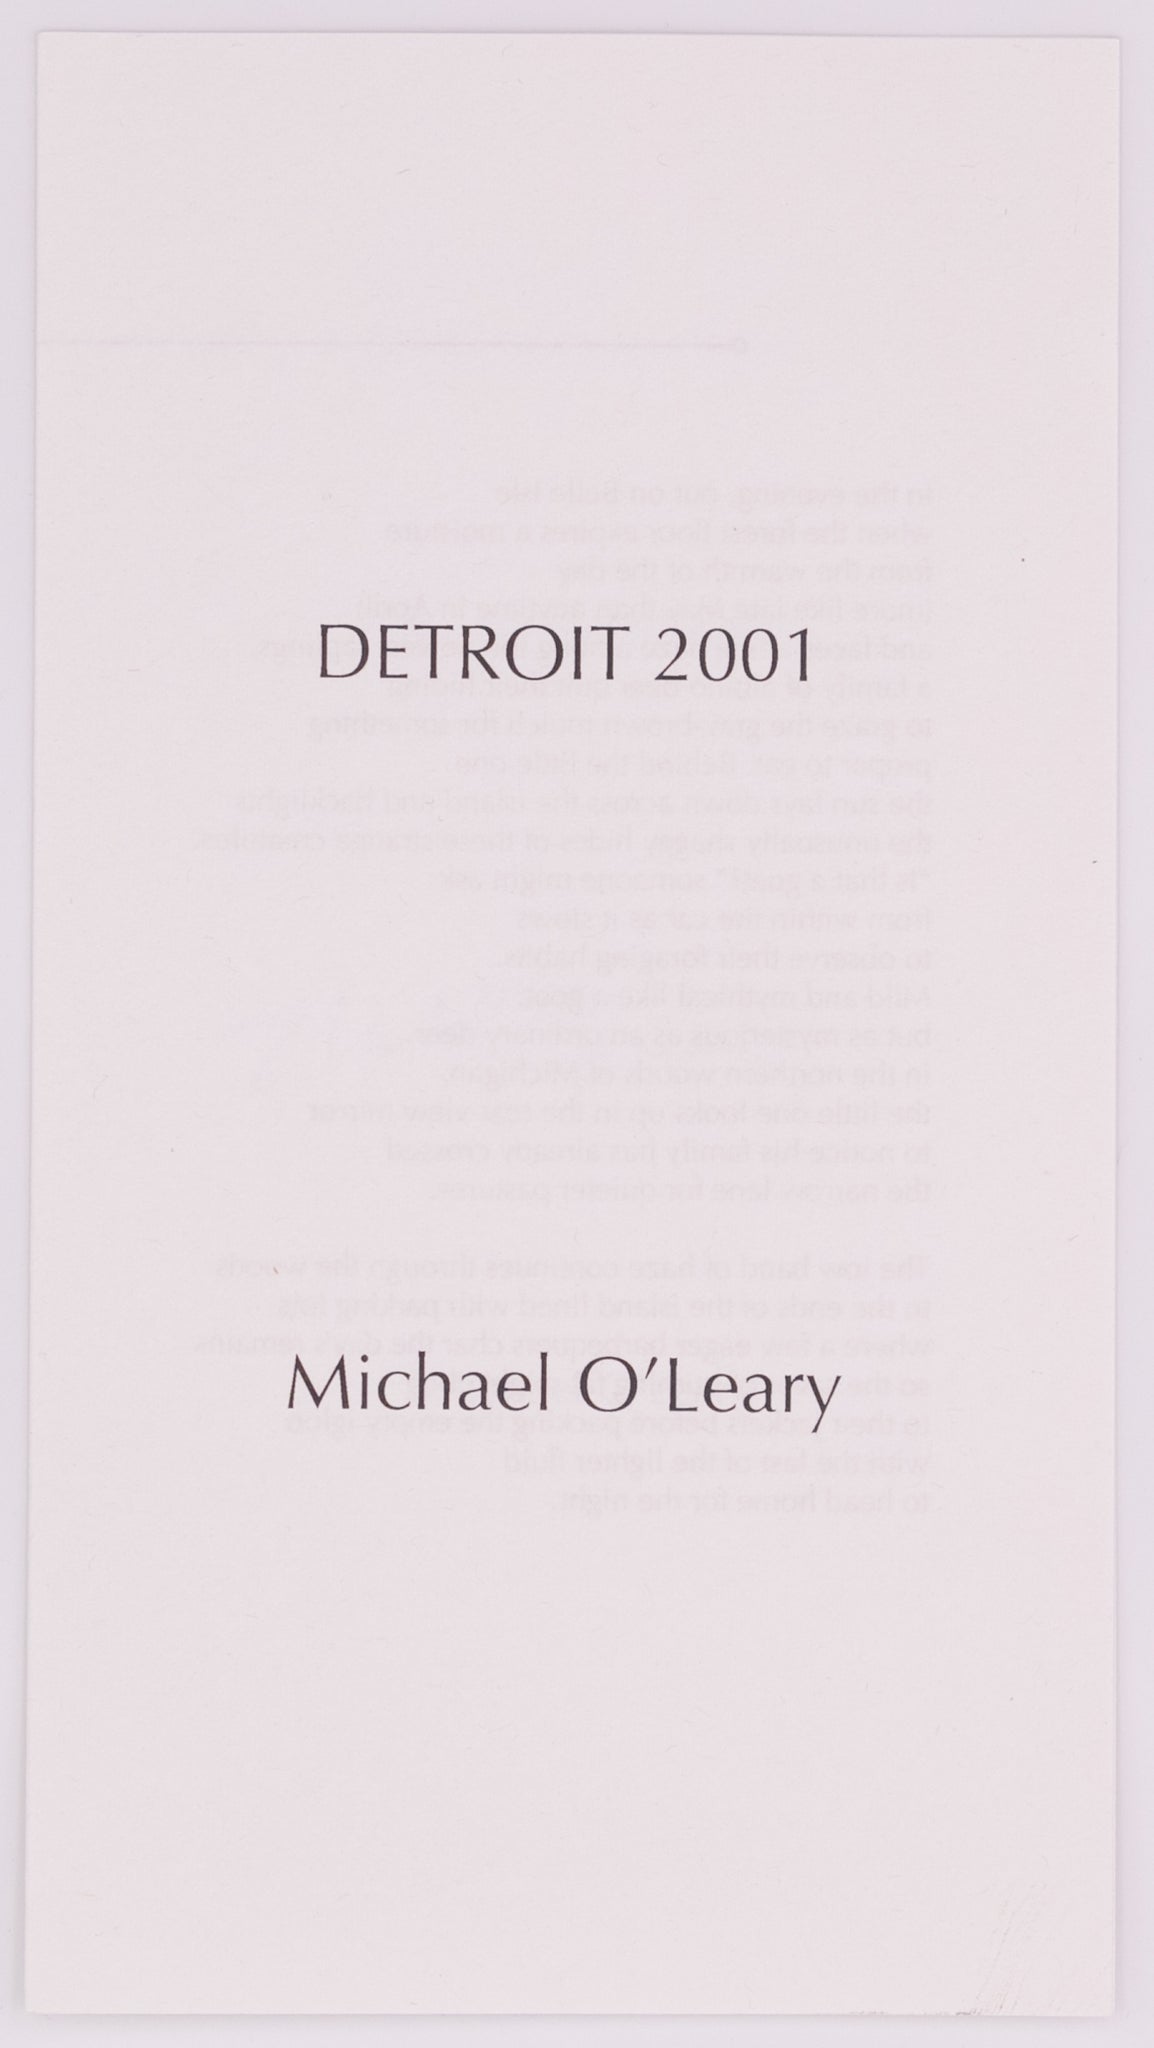 Cover of broadside titled Detroit 2001 by Michael O'Leary. Black text on white paper.